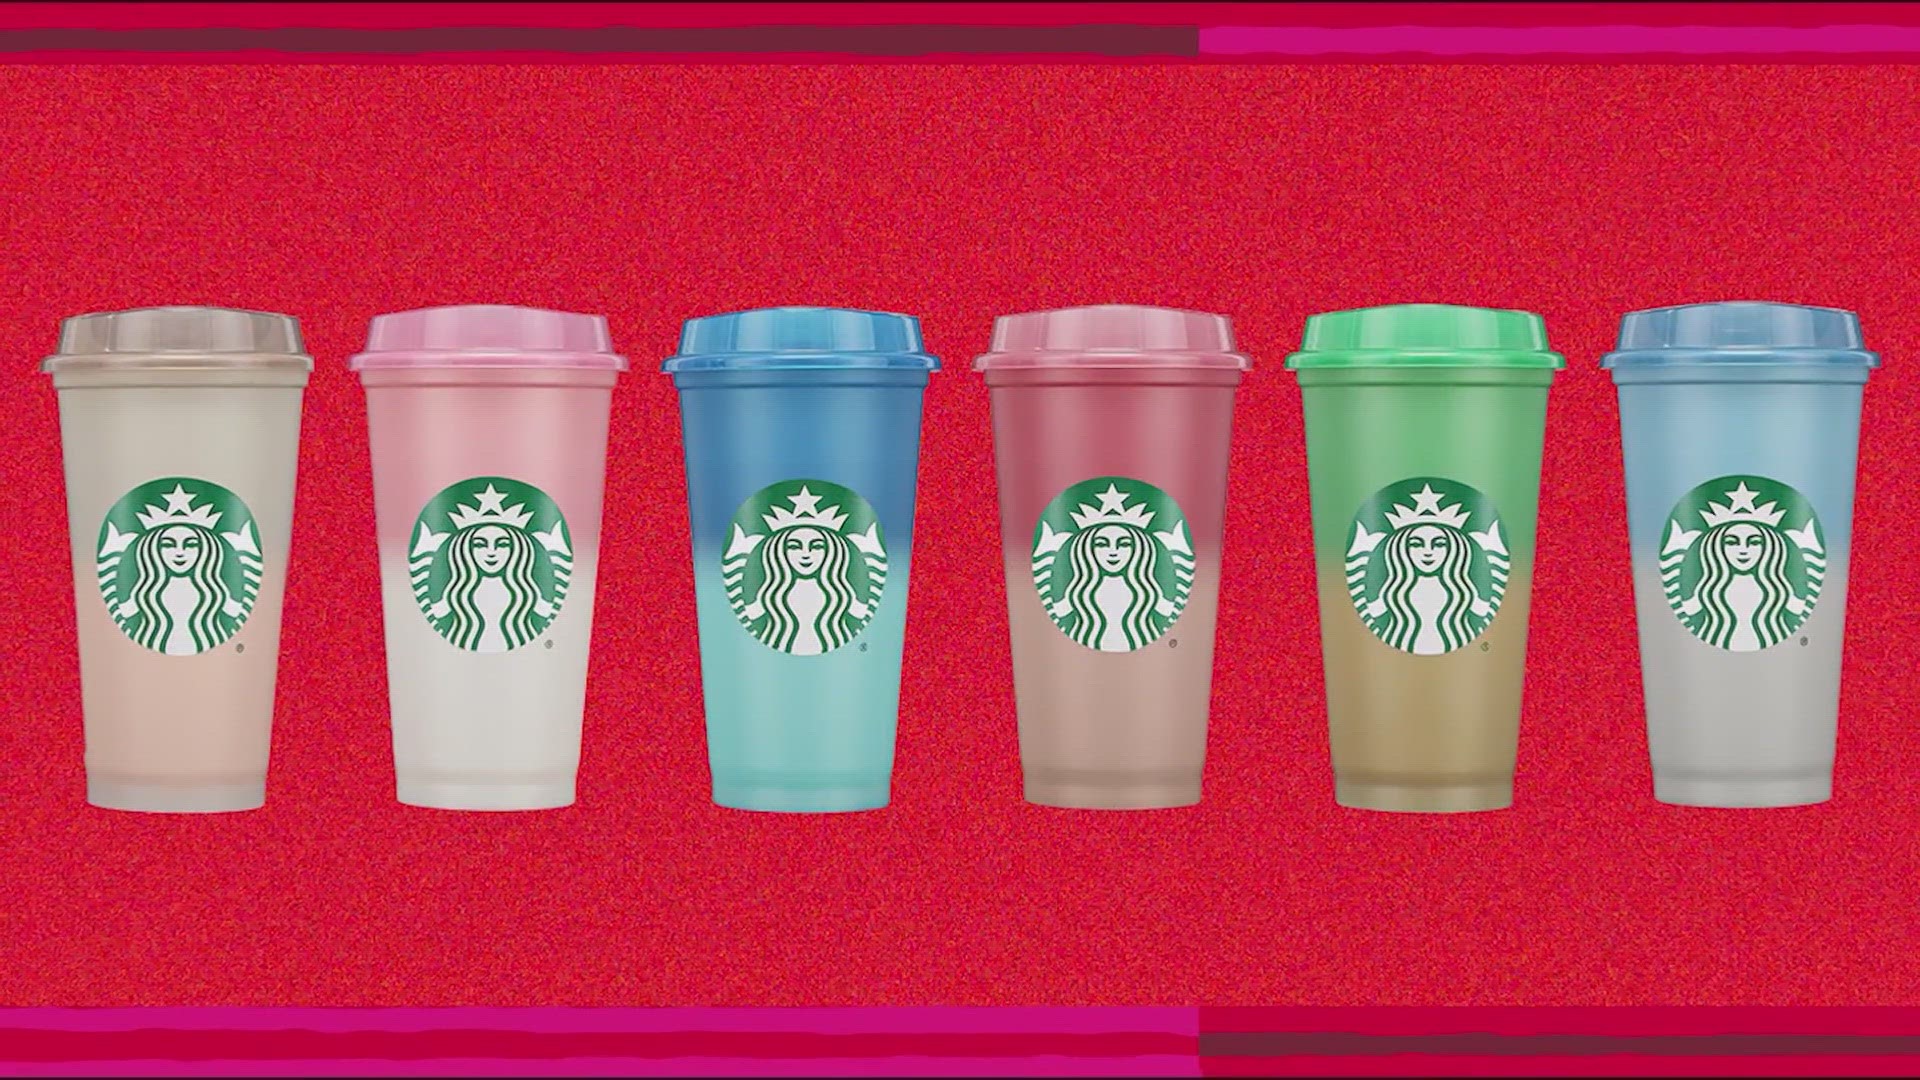 Starbucks unveils holiday cups and tumblers for Christmas season